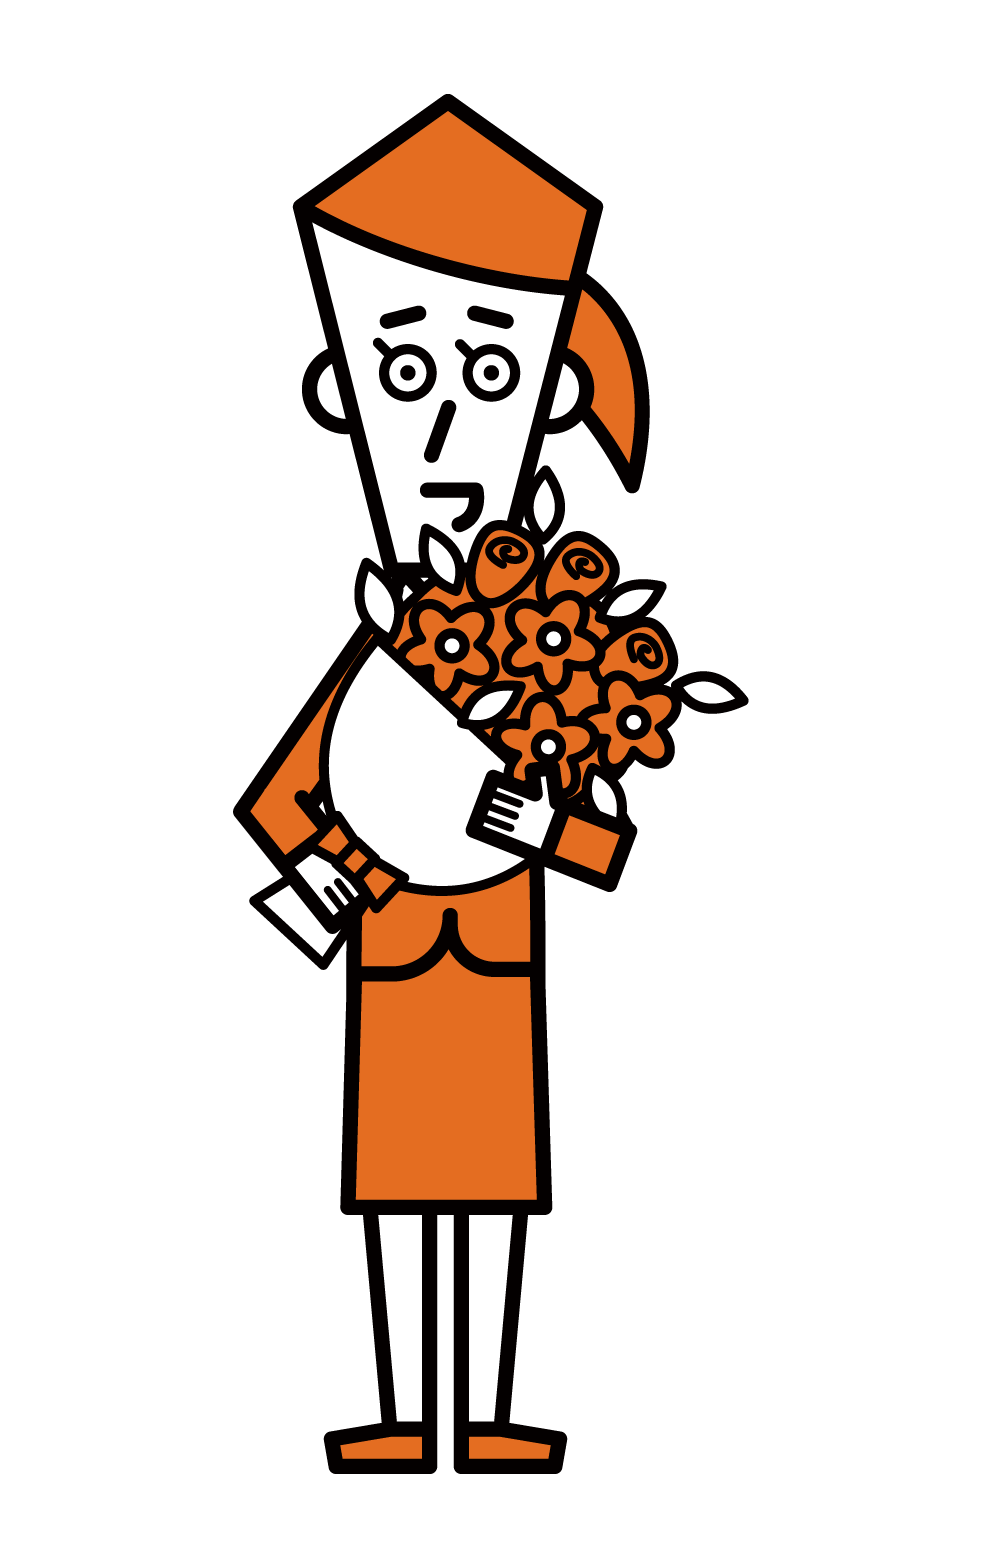 Illustration of a person (woman) giving a bouquet of flowers